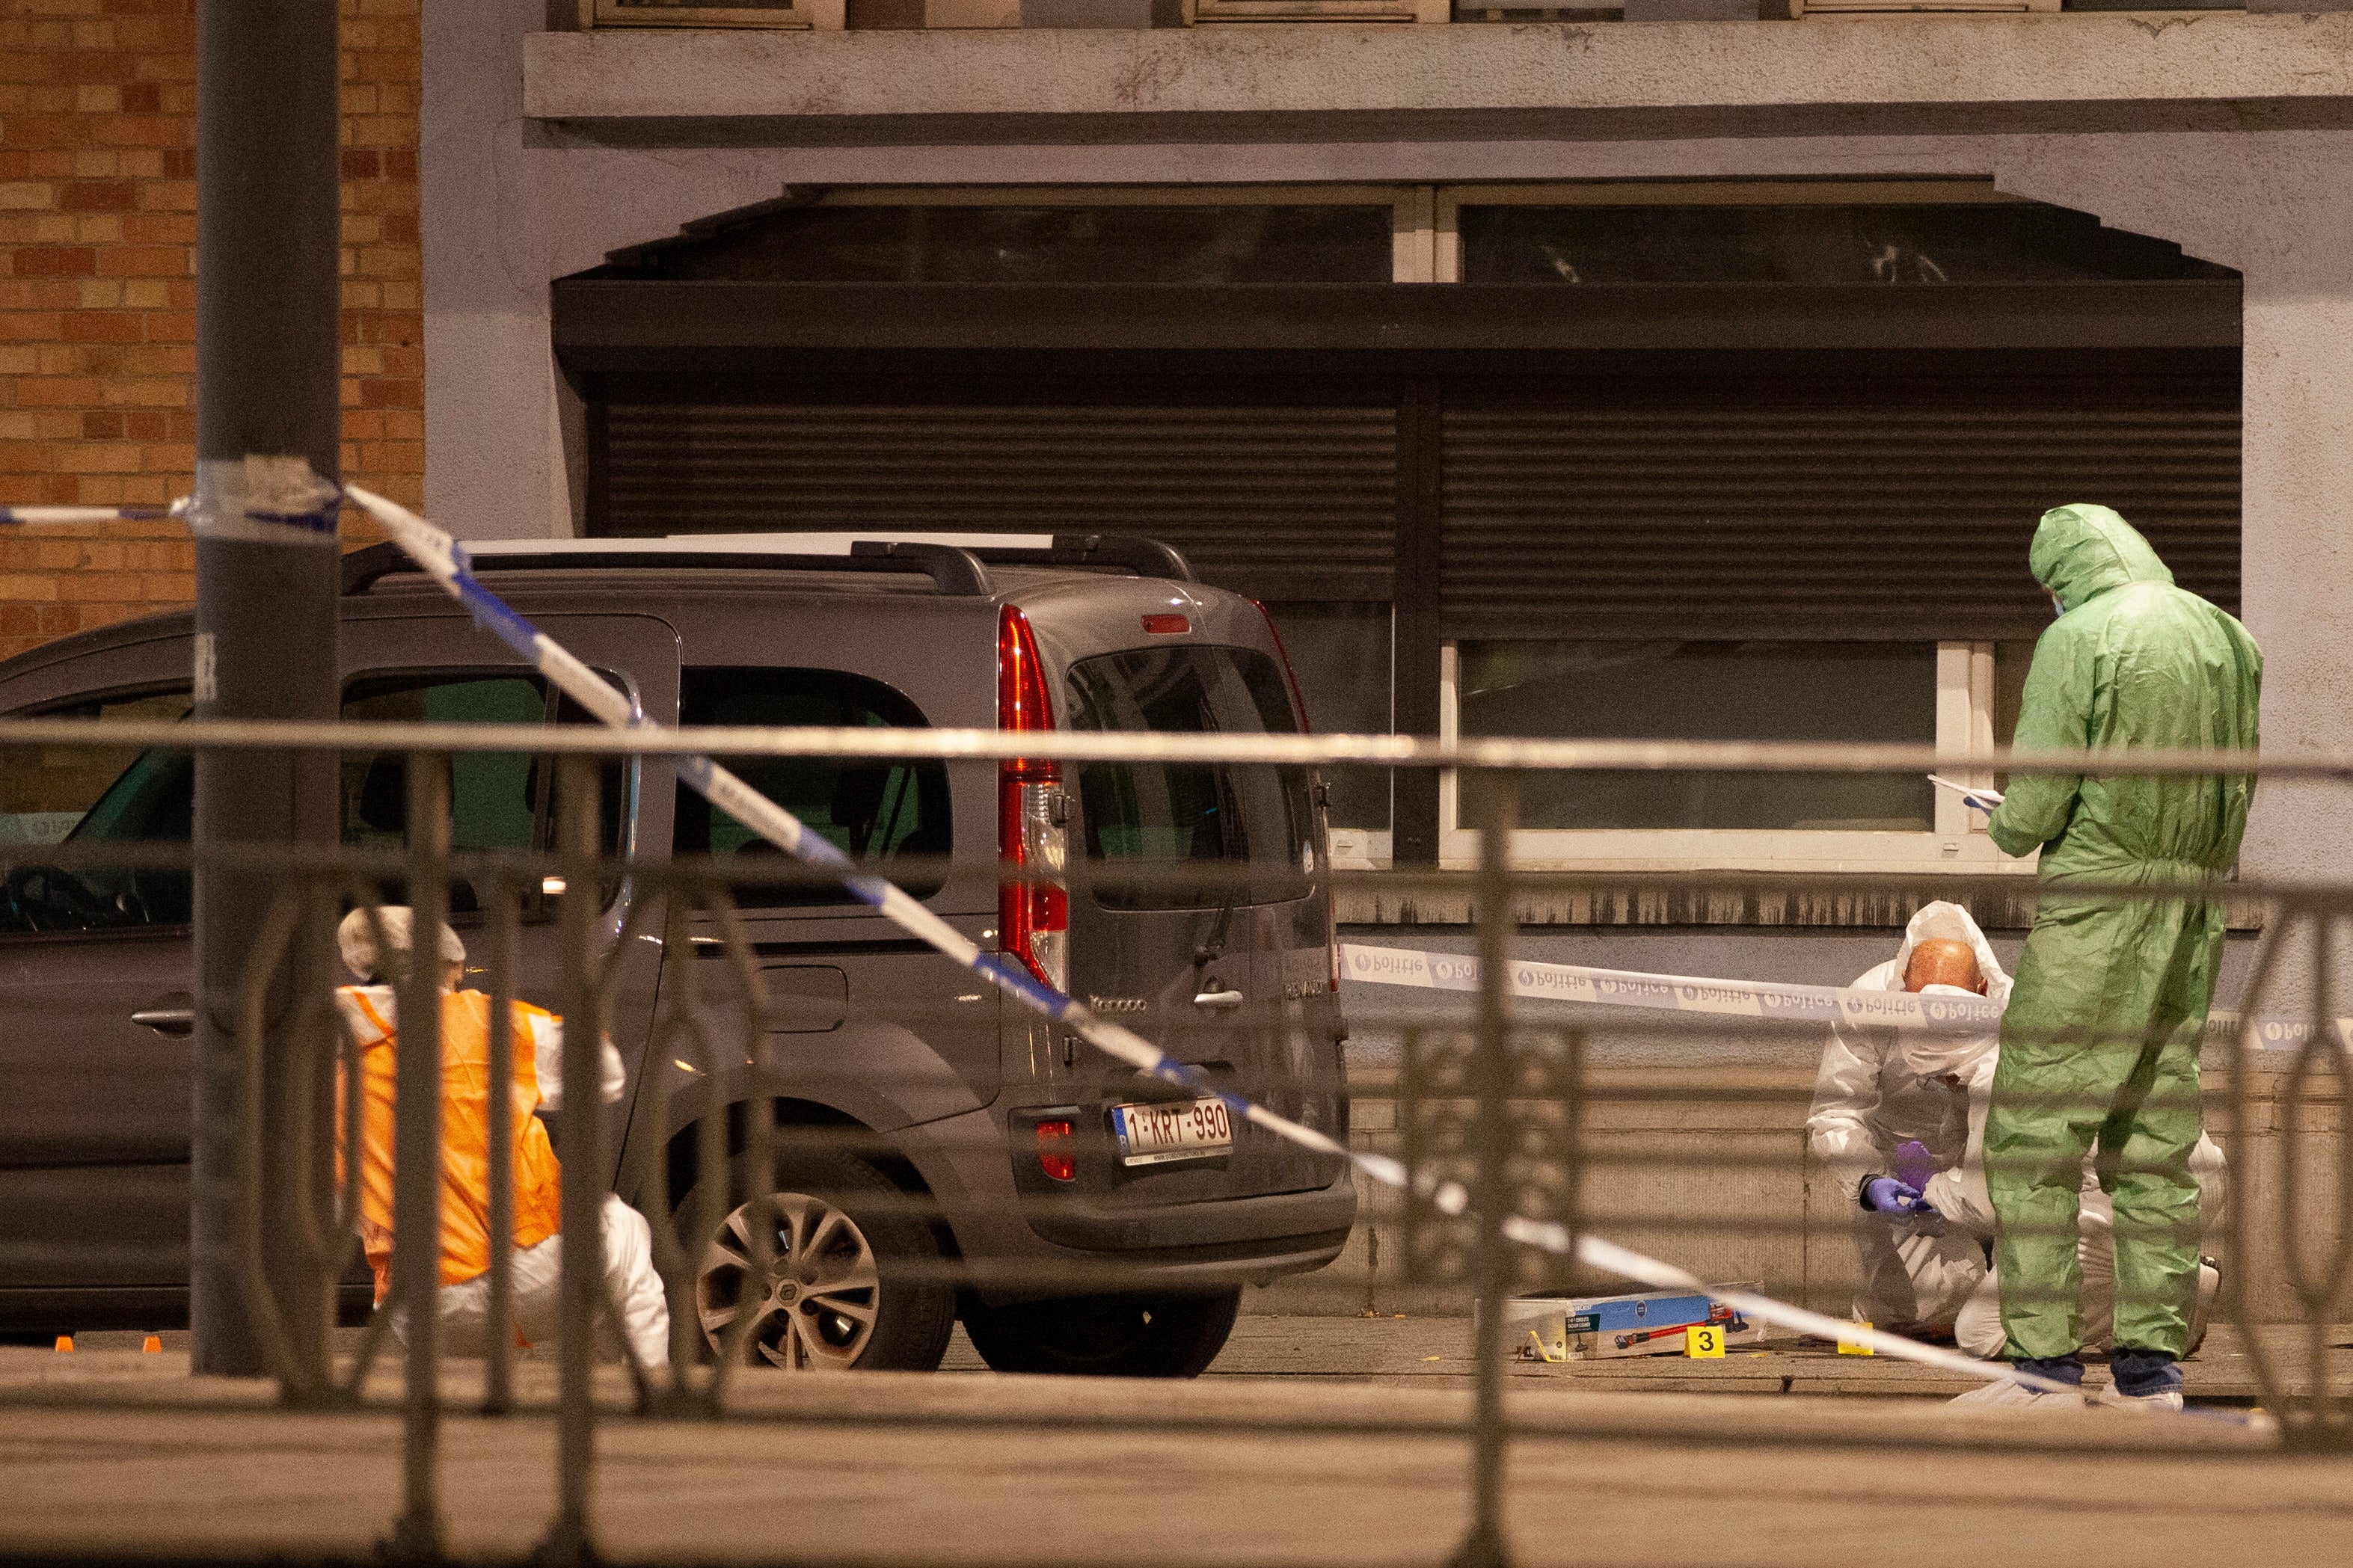 Police and inspectors work in an area where a shooting took place in the center of Brussels